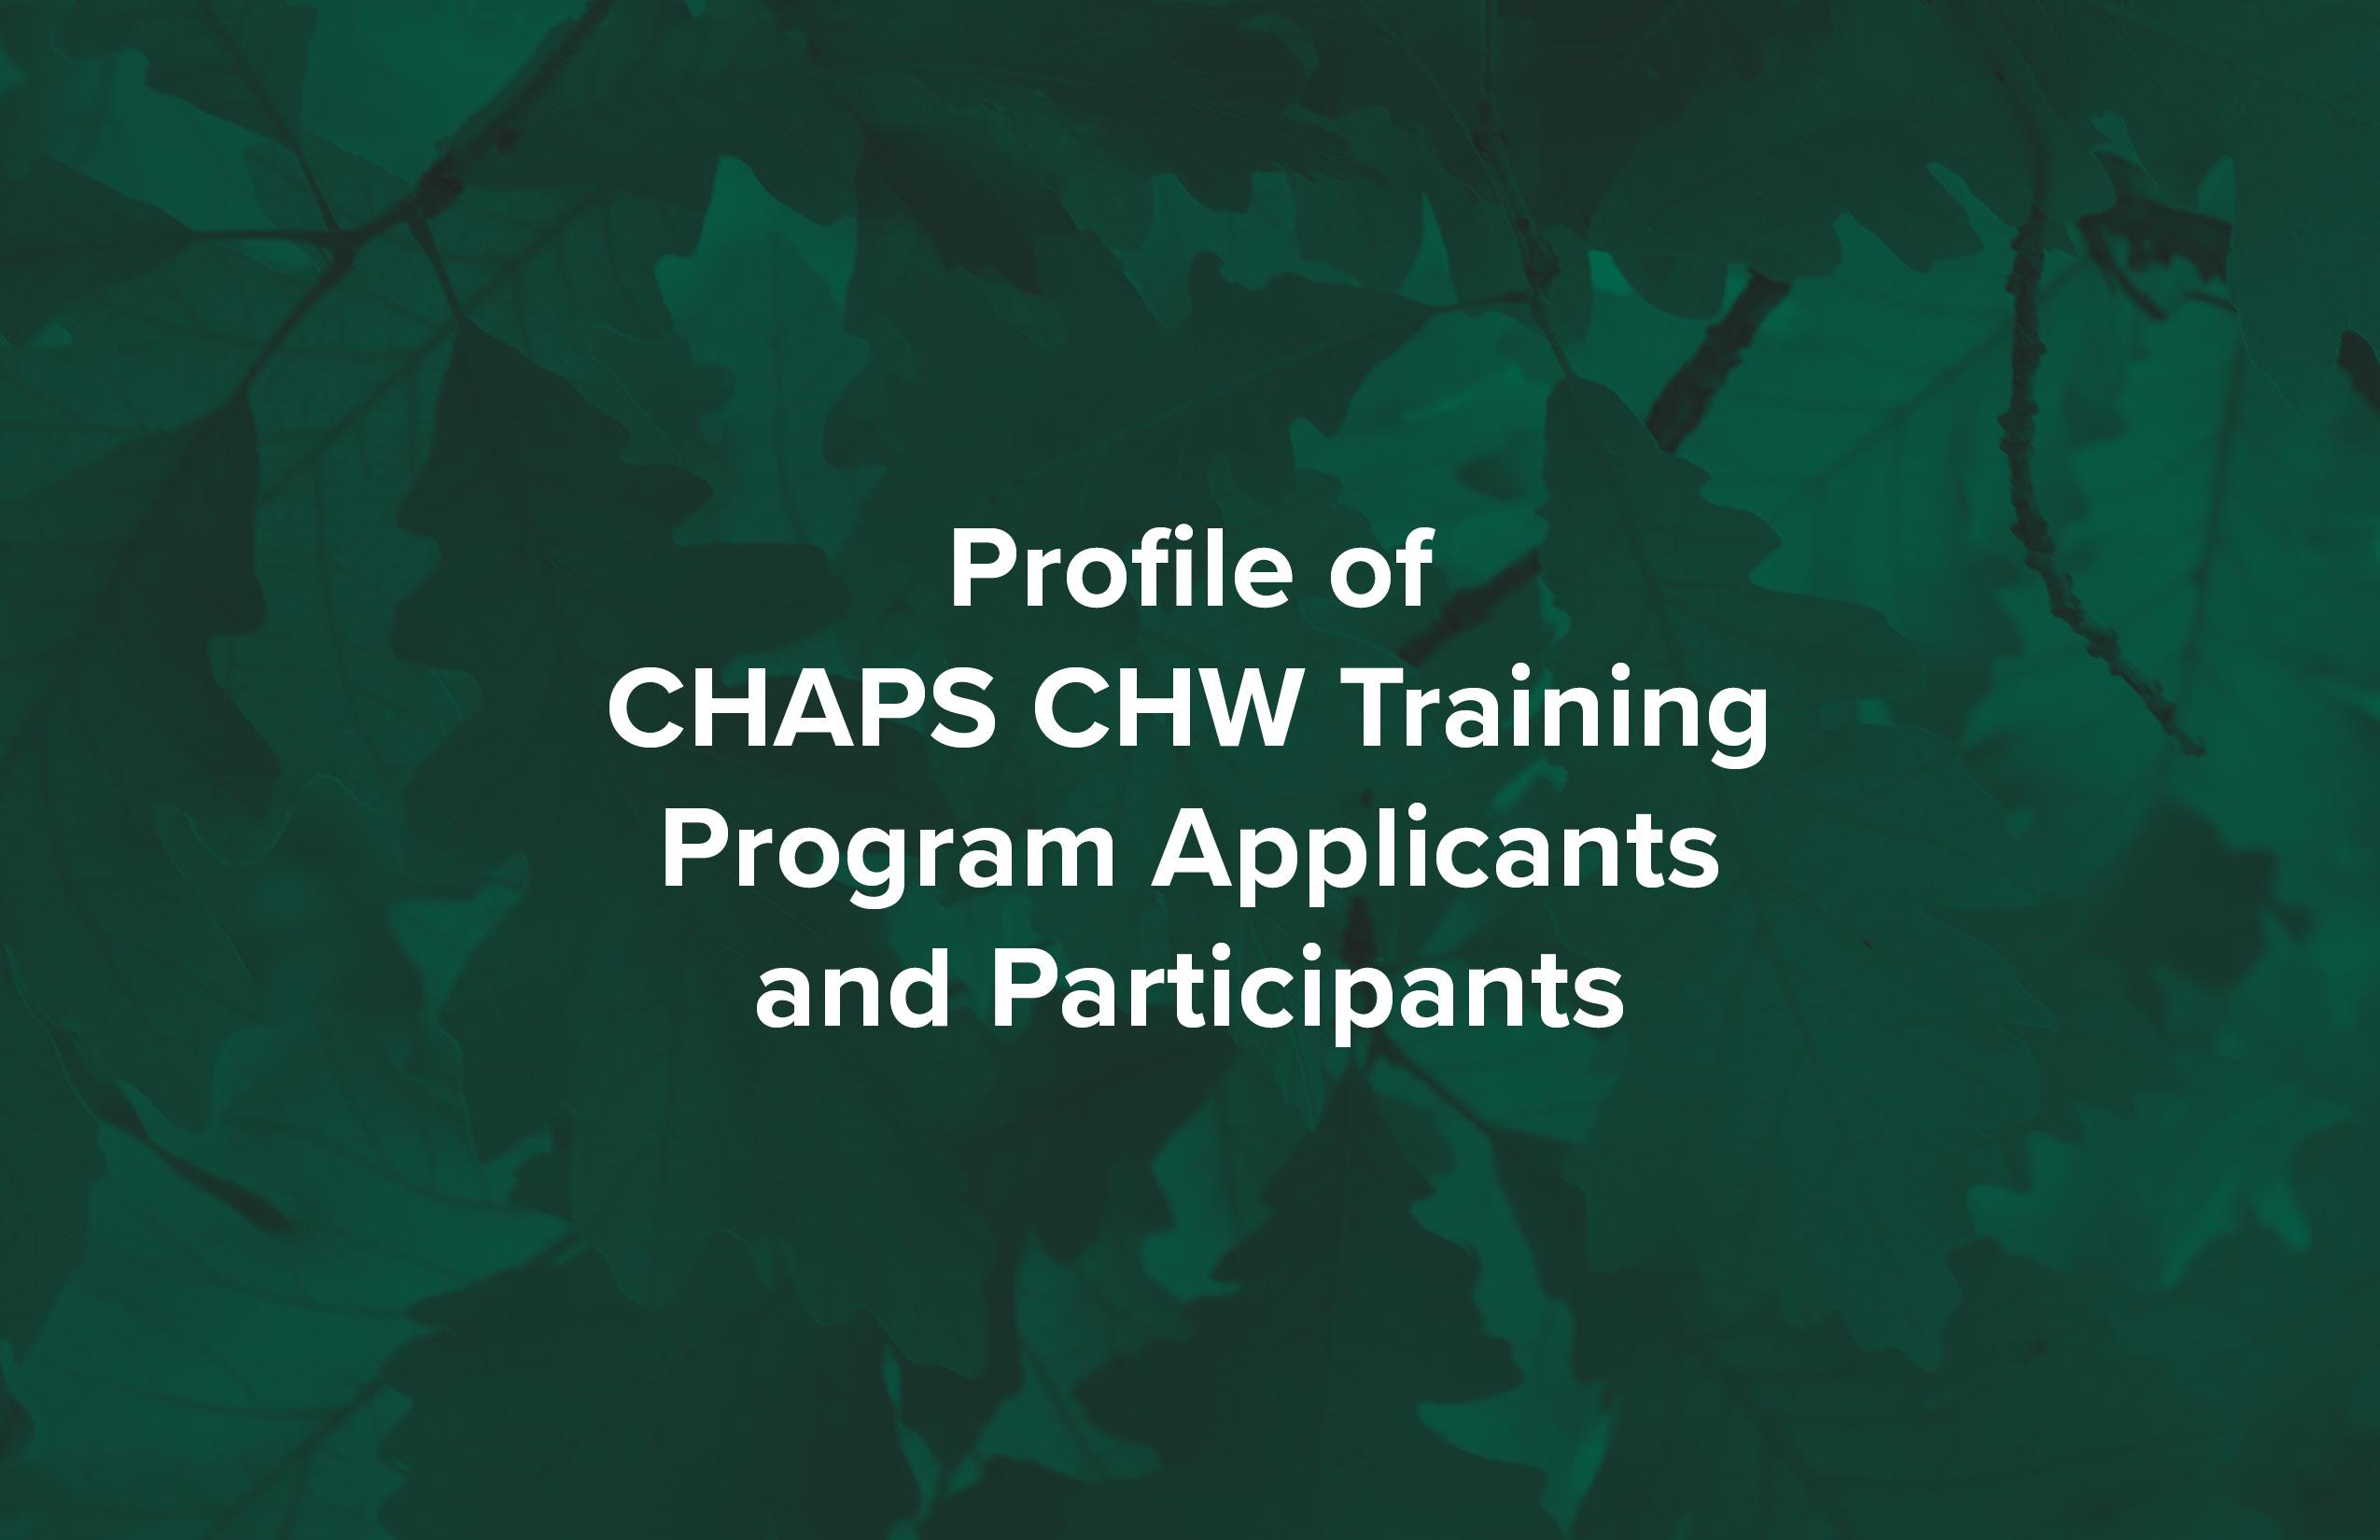 A back ground of green leaves overlaid with white text "Profile of  CHAPS CHW Training Program Applicants and Participants"